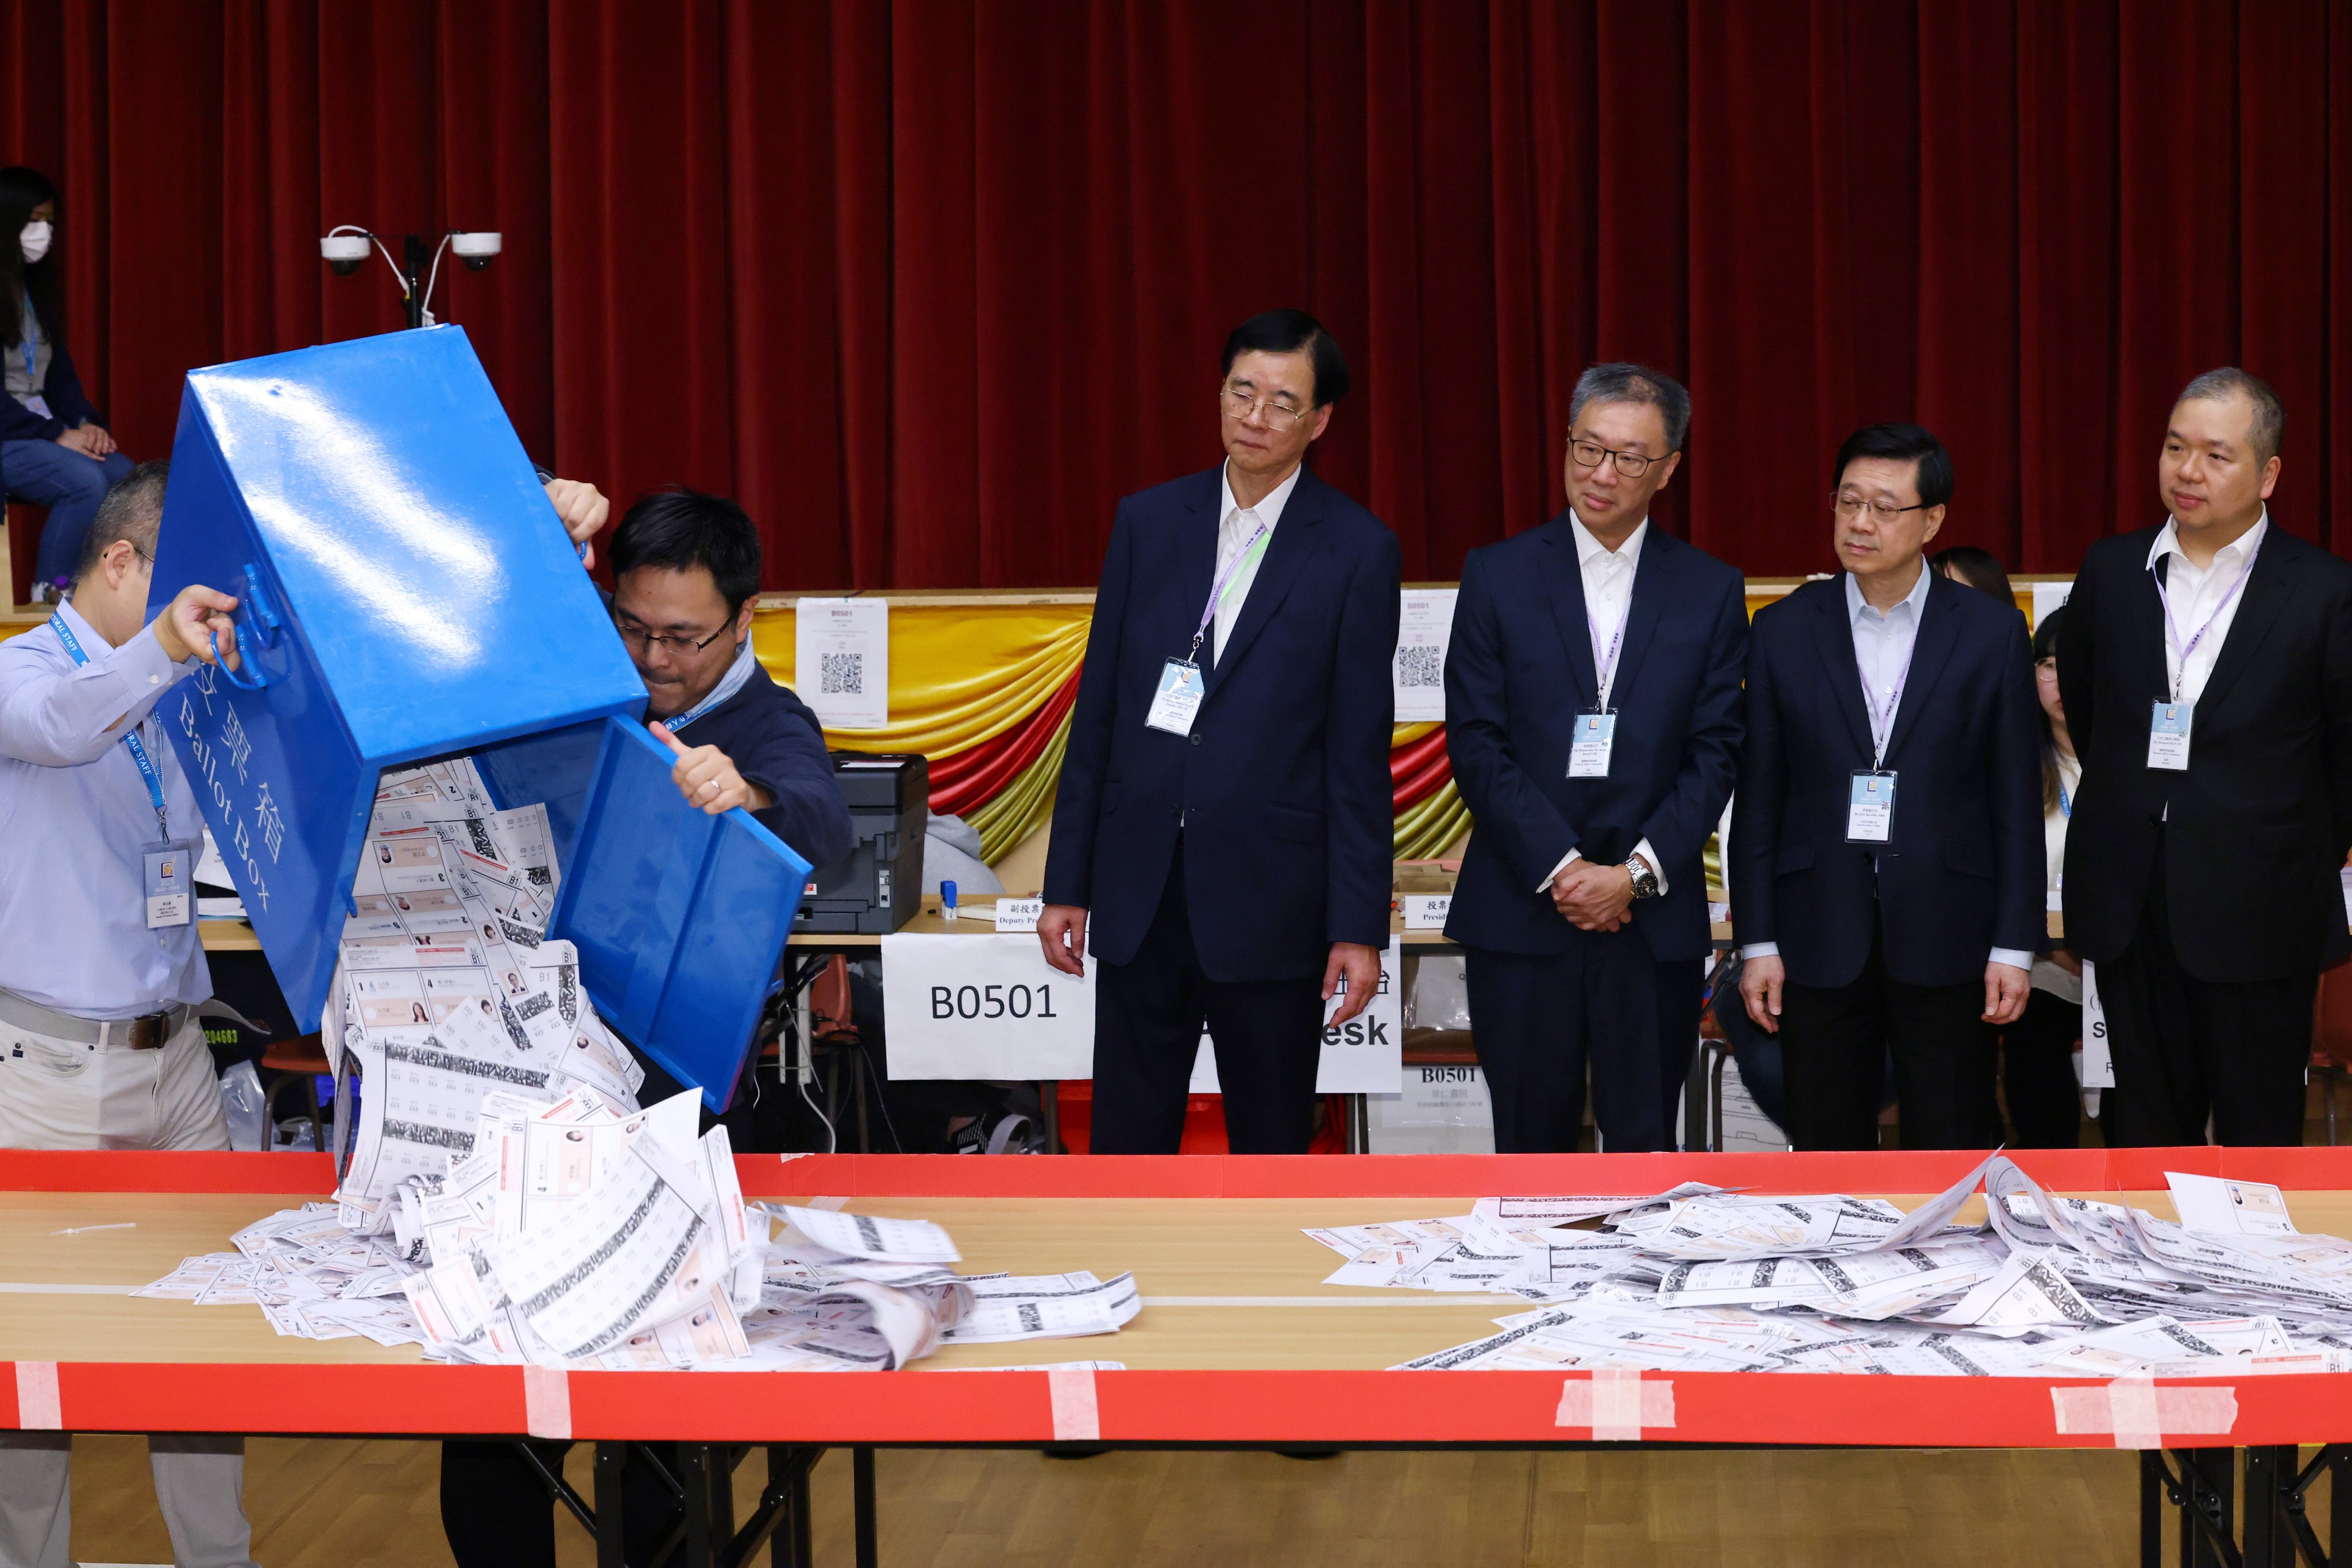 Ballot boxes are emptied as the vote count begins after Sunday’s election. Photo: Dickson Lee